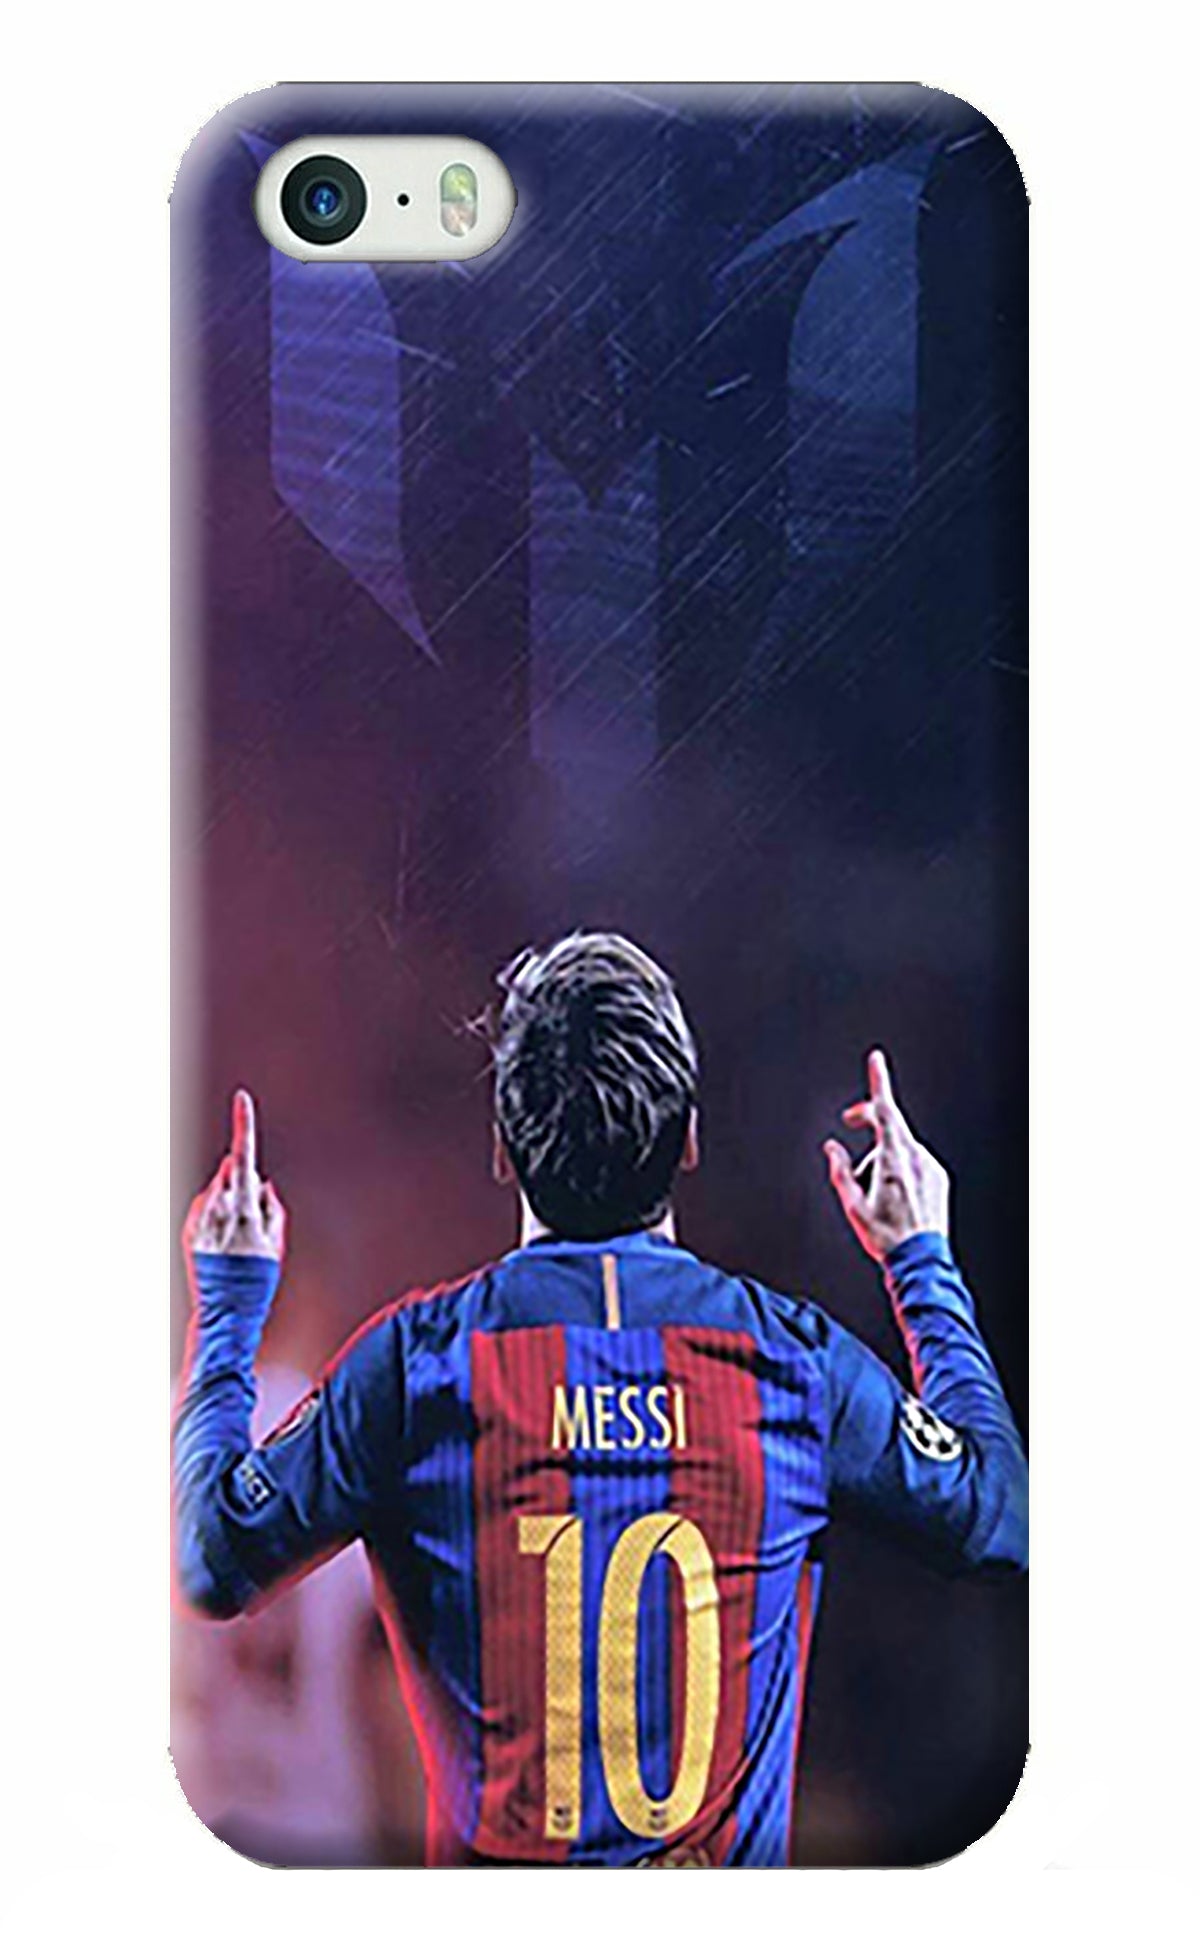 Messi iPhone 5/5s Back Cover